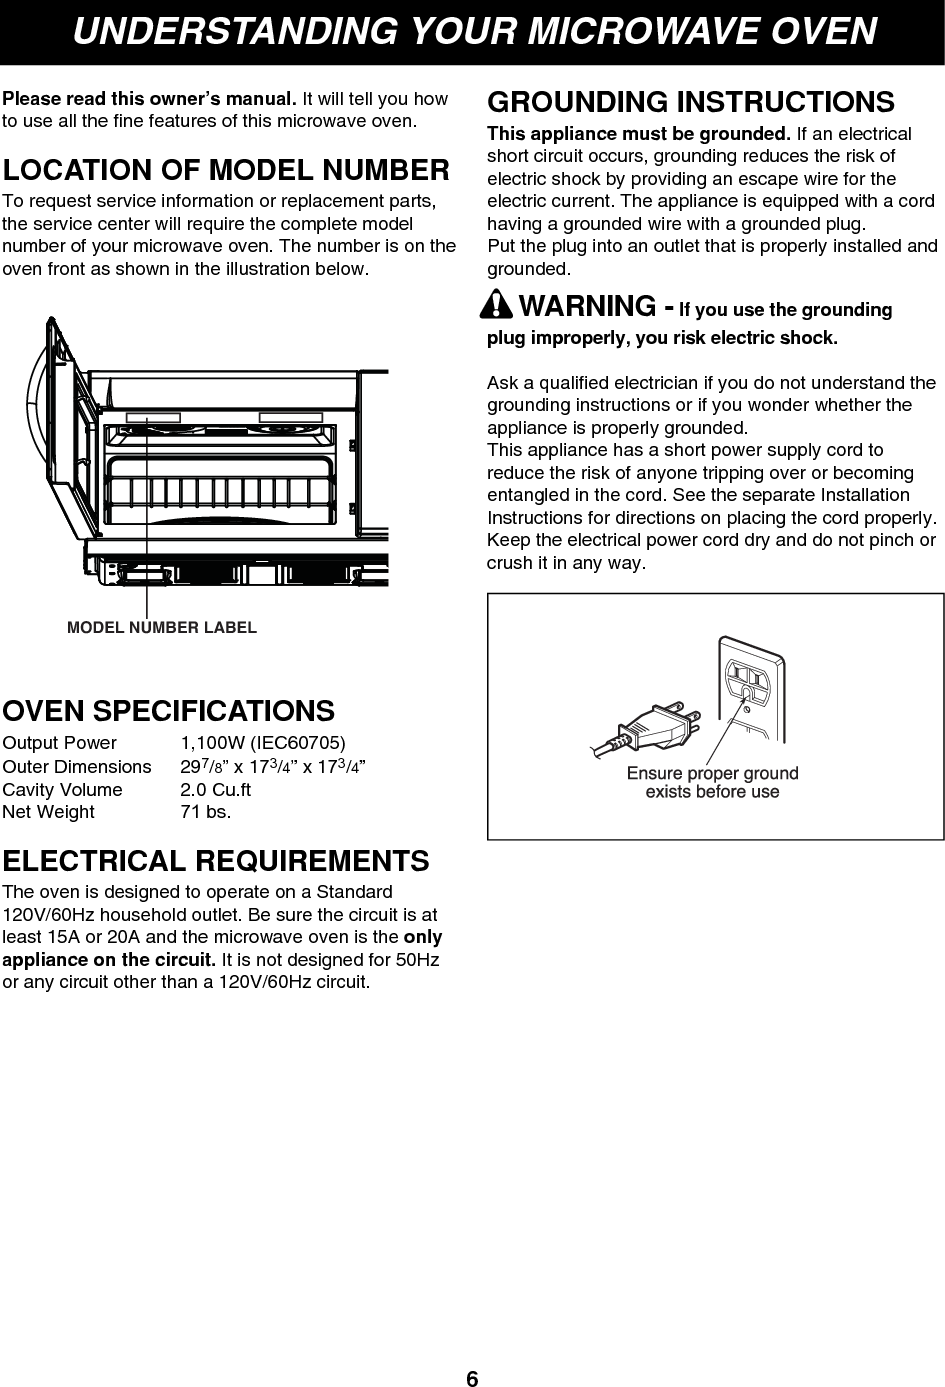 UNDERSTANDING YOUR MICROWAVE OVENPlease read this owner’s manual. It will tell you howto use all the fine features of this microwave oven.LOCATION OF MODEL NUMBERTo request service information or replacement parts,the service center will require the complete modelnumber of your microwave oven. The number is on theoven front as shown in the illustration below.OVEN SPECIFICATIONSOutput Power 1,100W (IEC60705)Outer Dimensions 297/8” x 173/4” x 173/4”Cavity Volume 2.0 Cu.ftNet Weight 71 bs.ELECTRICAL REQUIREMENTSThe oven is designed to operate on a Standard120V/60Hz household outlet. Be sure the circuit is atleast 15A or 20A and the microwave oven is the onlyappliance on the circuit. It is not designed for 50Hzor any circuit other than a 120V/60Hz circuit.GROUNDING INSTRUCTIONSThis appliance must be grounded. If an electricalshort circuit occurs, grounding reduces the risk ofelectric shock by providing an escape wire for theelectric current. The appliance is equipped with a cordhaving a grounded wire with a grounded plug. Put the plug into an outlet that is properly installed andgrounded.WARNING - If you use the groundingplug improperly, you risk electric shock.Ask a qualified electrician if you do not understand thegrounding instructions or if you wonder whether theappliance is properly grounded.This appliance has a short power supply cord toreduce the risk of anyone tripping over or becomingentangled in the cord. See the separate InstallationInstructions for directions on placing the cord properly.Keep the electrical power cord dry and do not pinch orcrush it in any way.6MODEL NUMBER LABEL